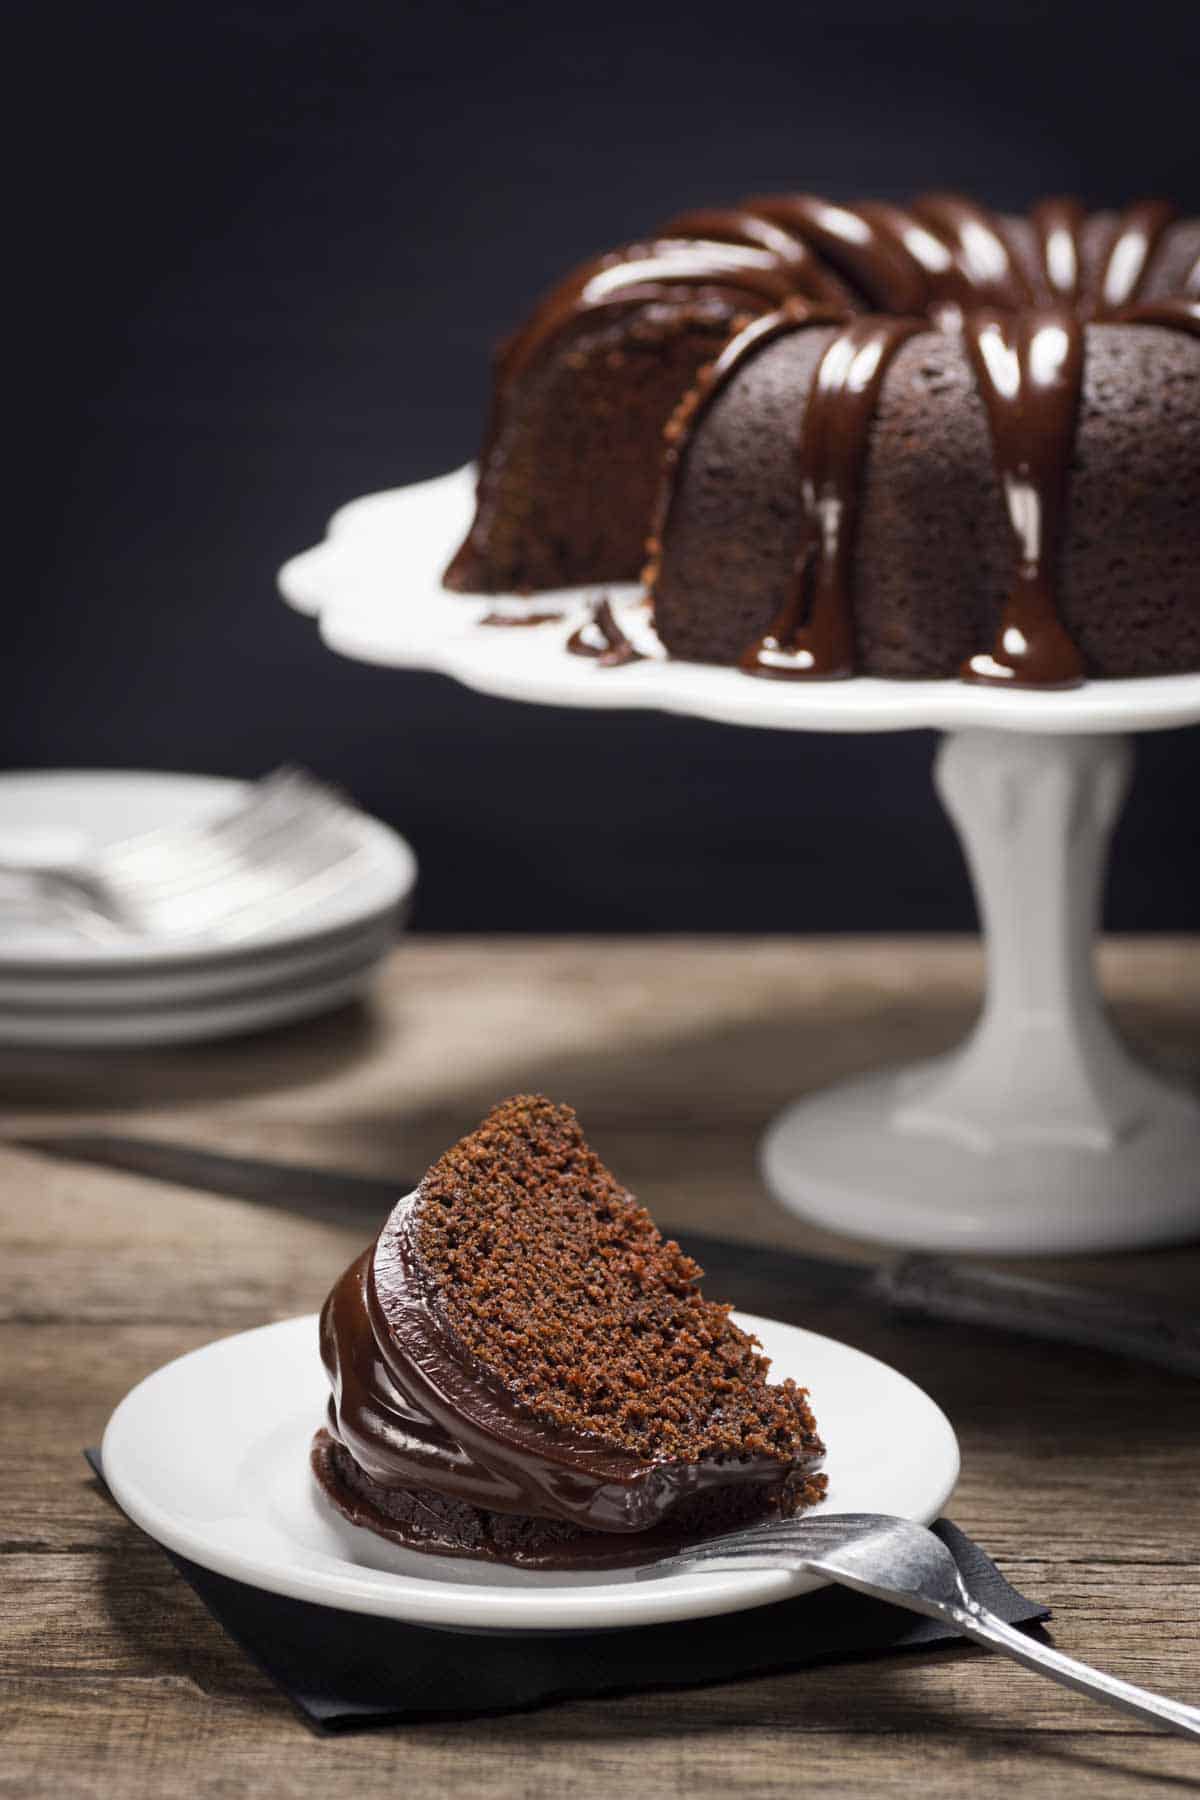 Slice of chocolate Bundt cake decorated with ganache on a plate. The full cake is on a cake stand in the background.